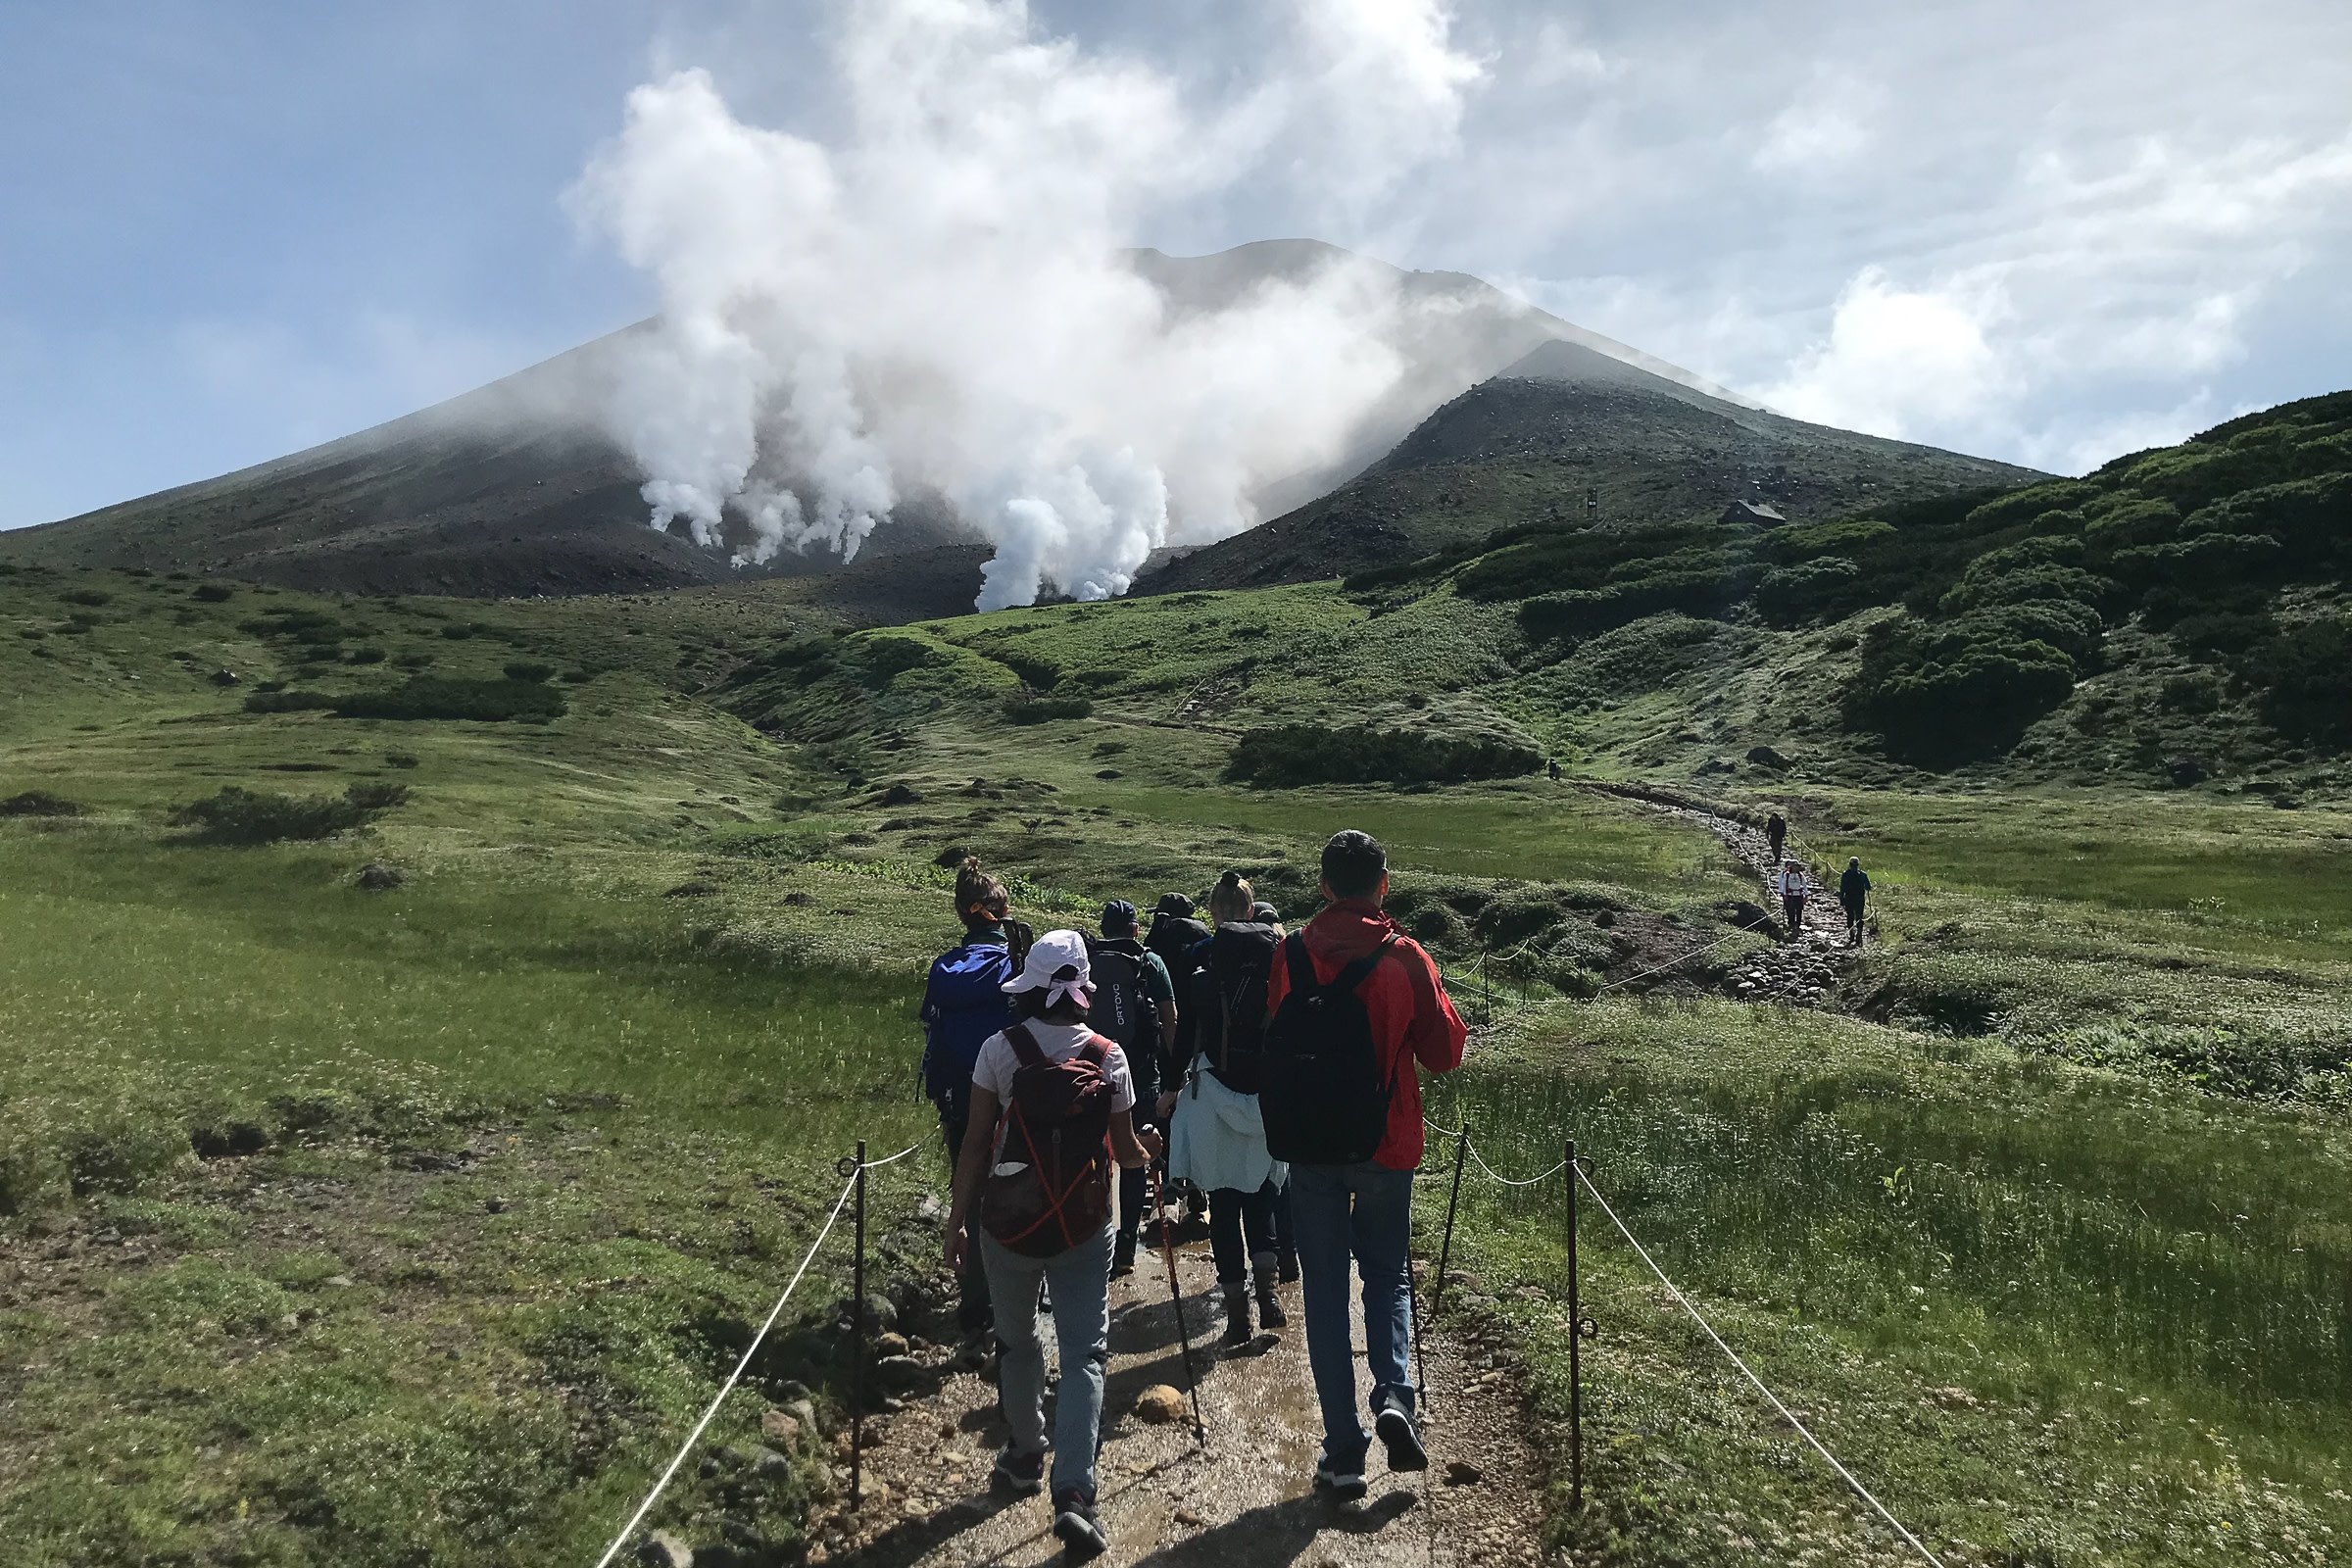 A group of hikers approach a steaming volcanic crater on Mt. Asahidake.